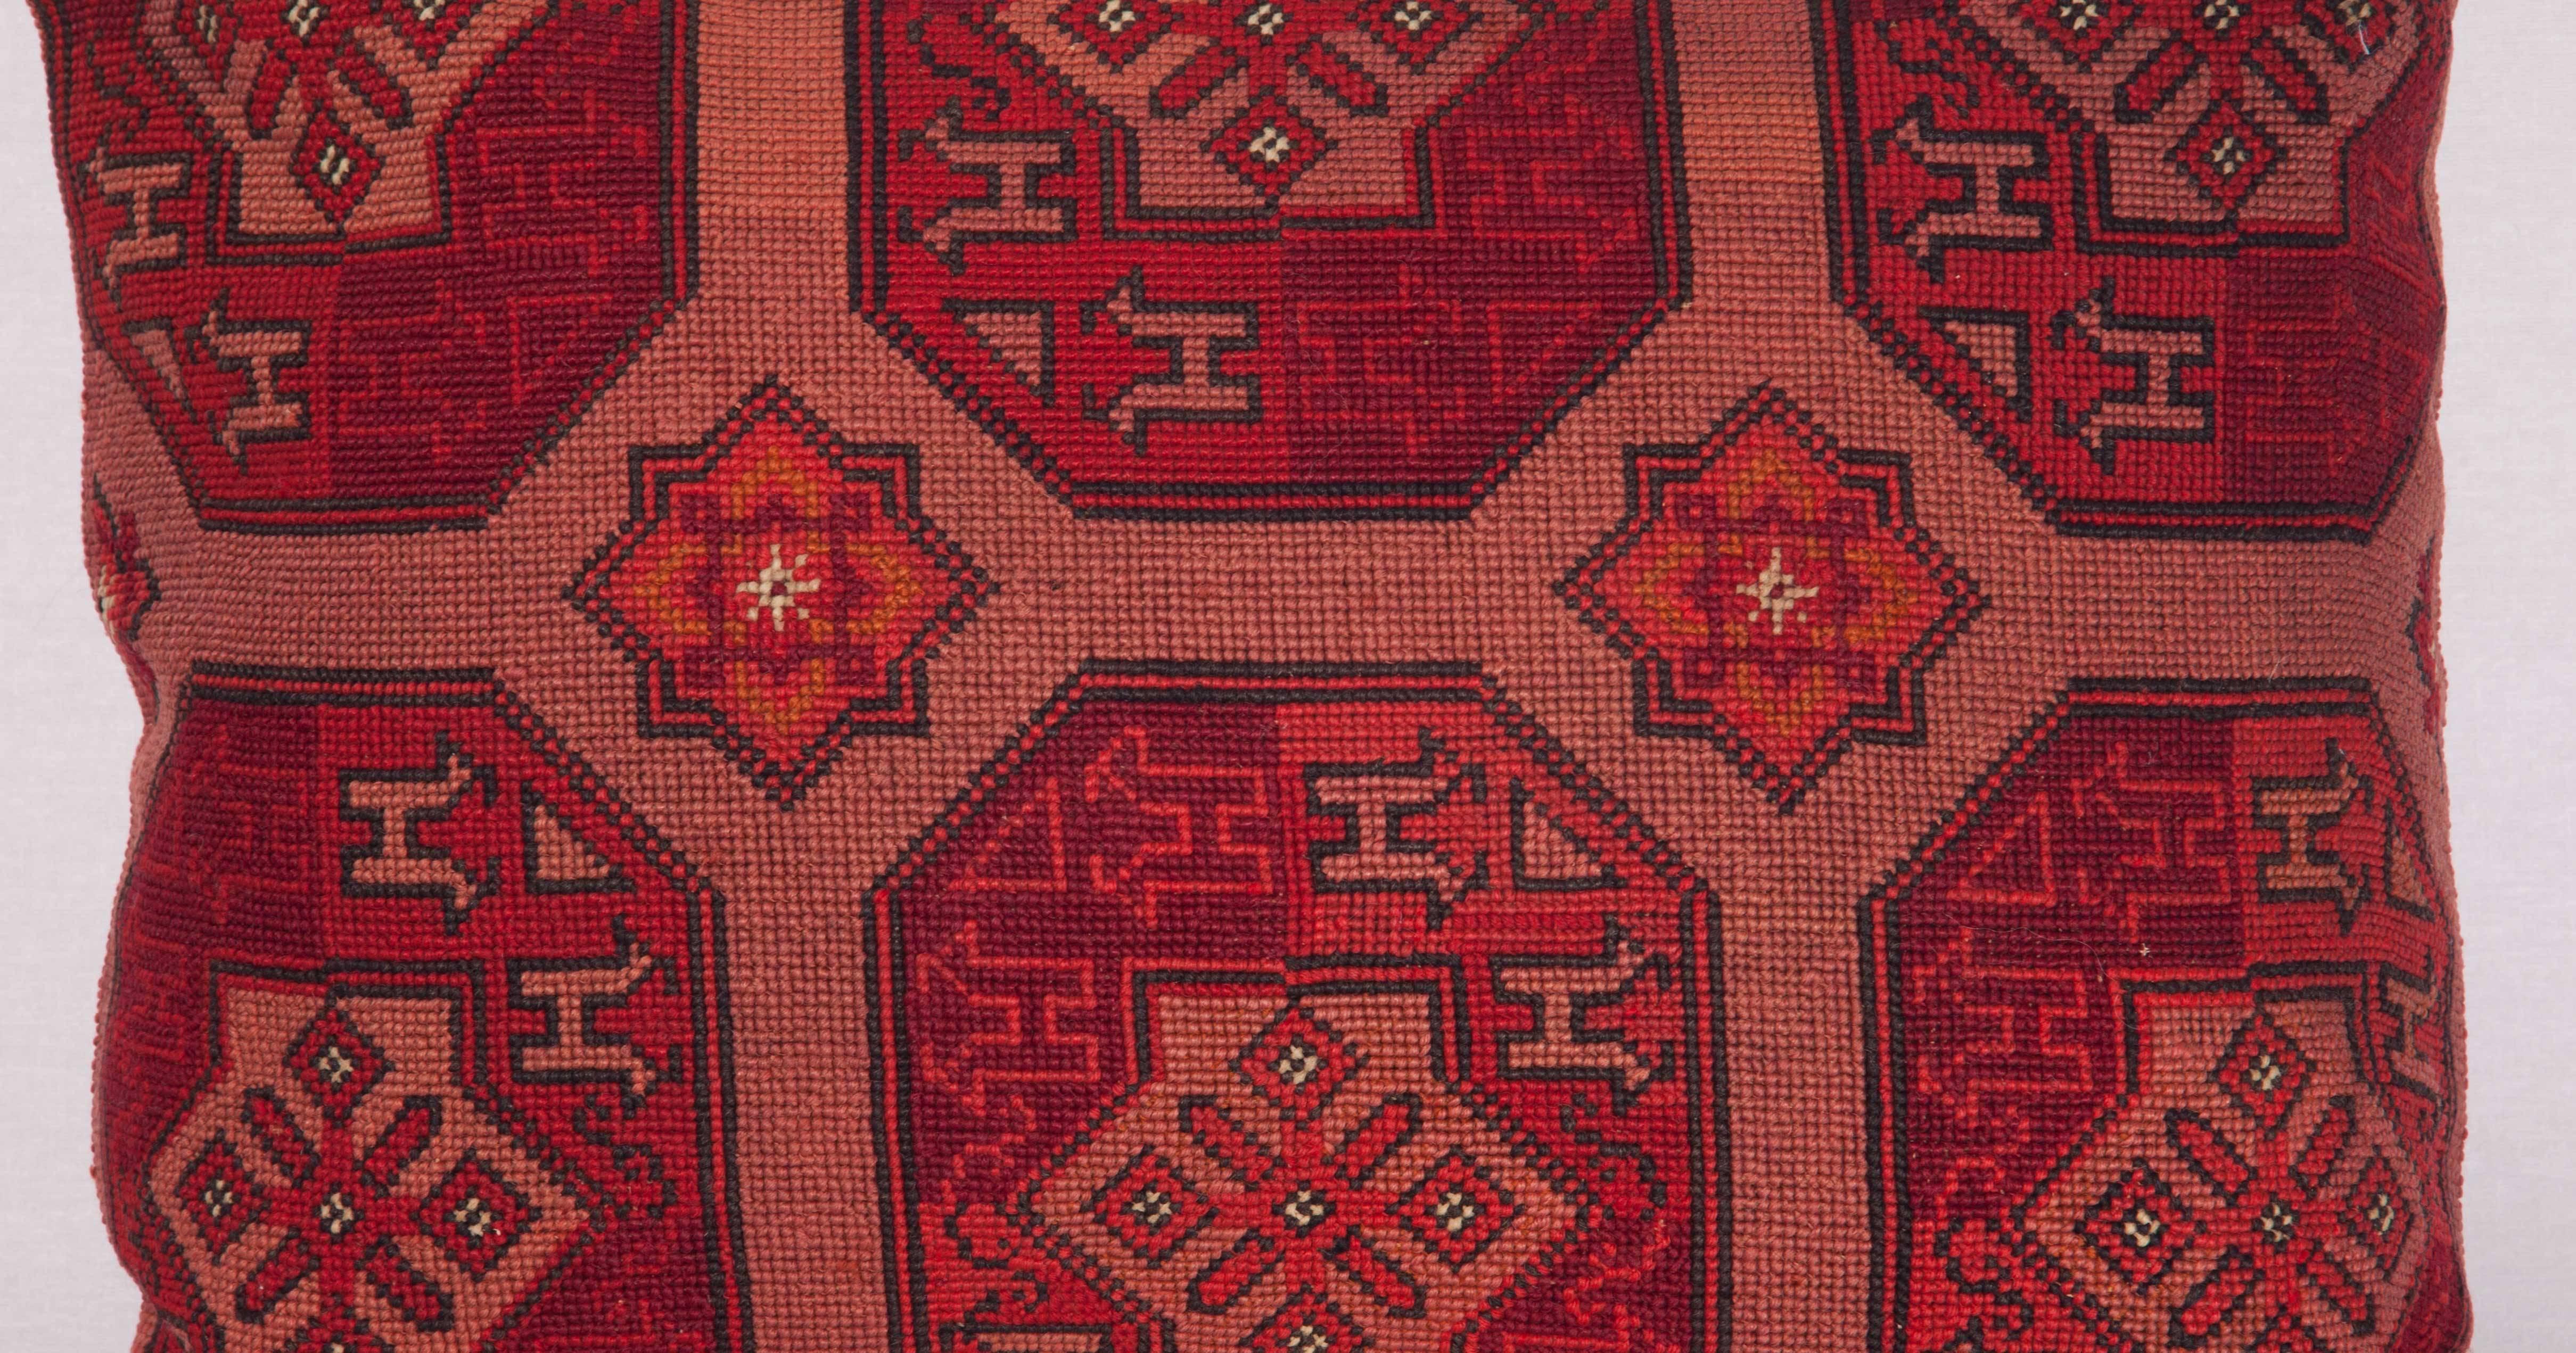 Suzani Pillow Made Out of an Early 20th Century Central Asian Cross Stitch Embroidery